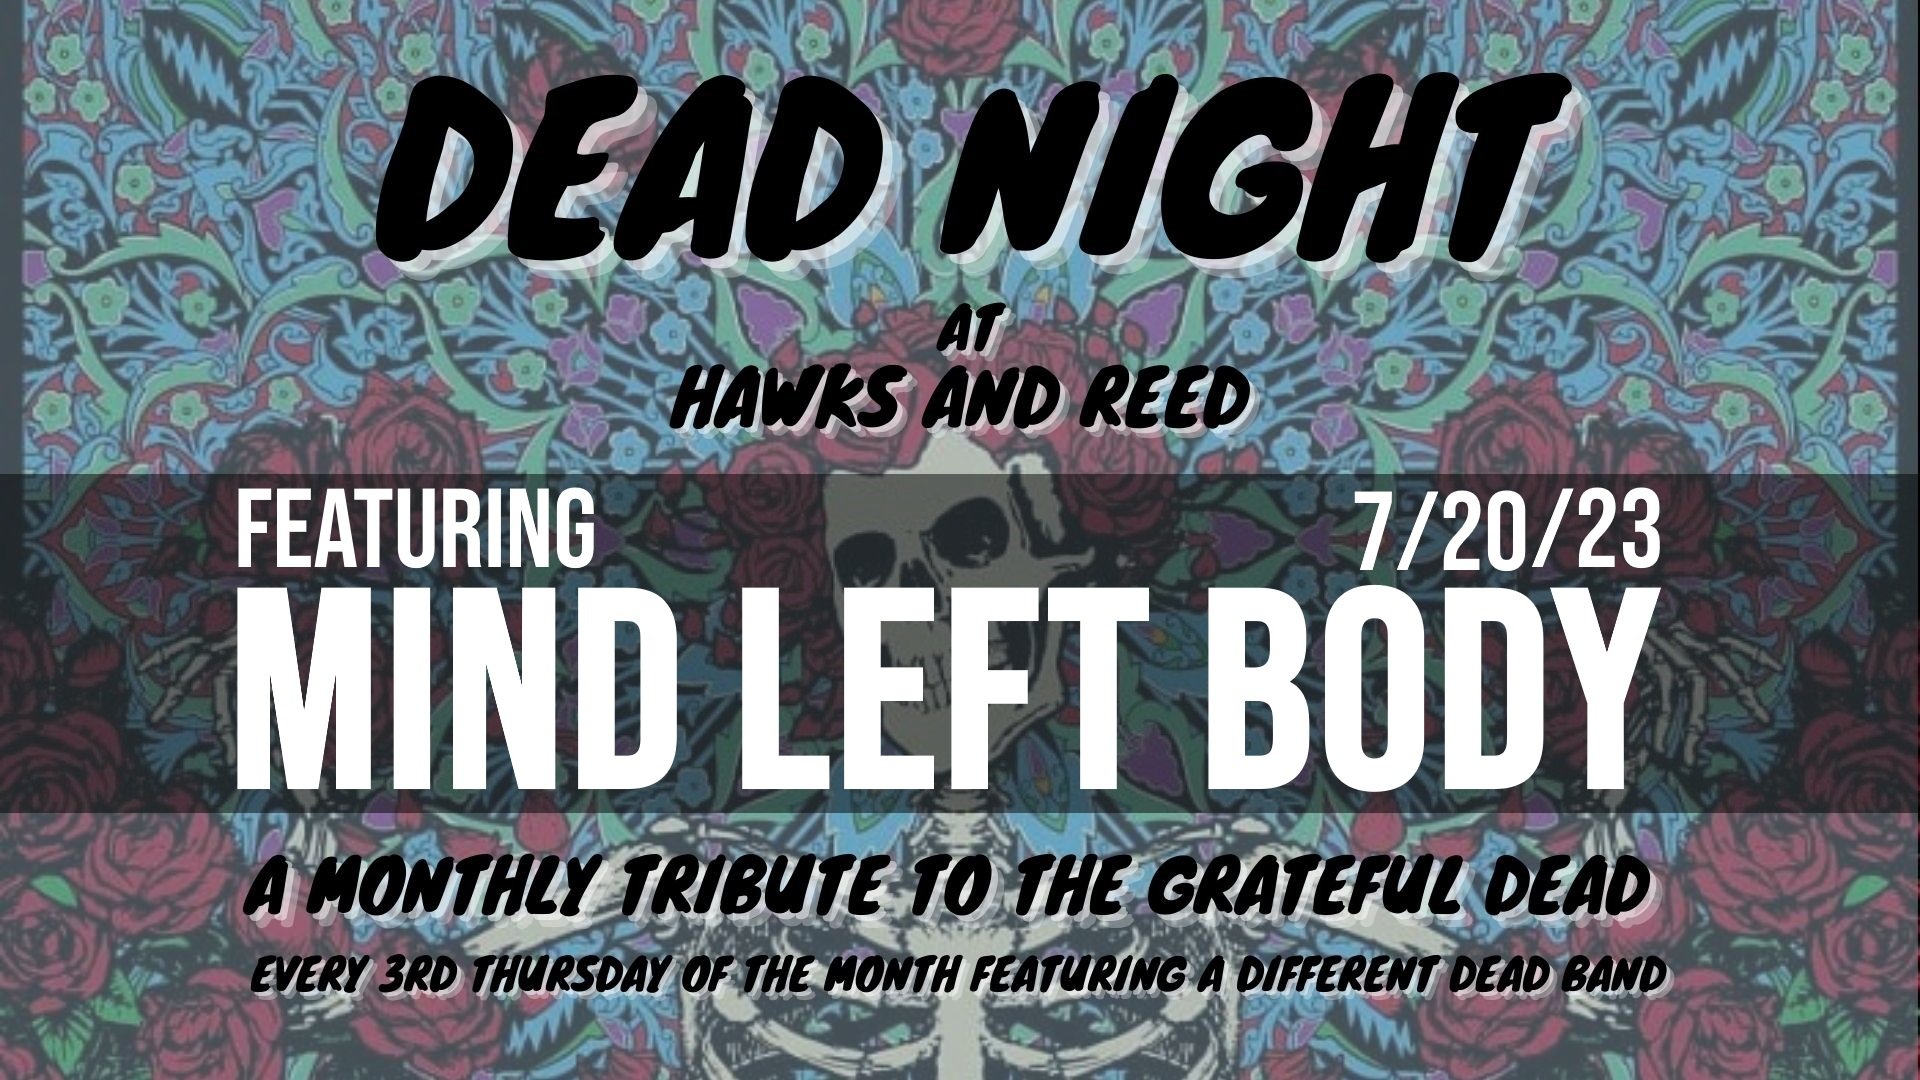 Dead Night with Mind Left Body at Hawks and Reed